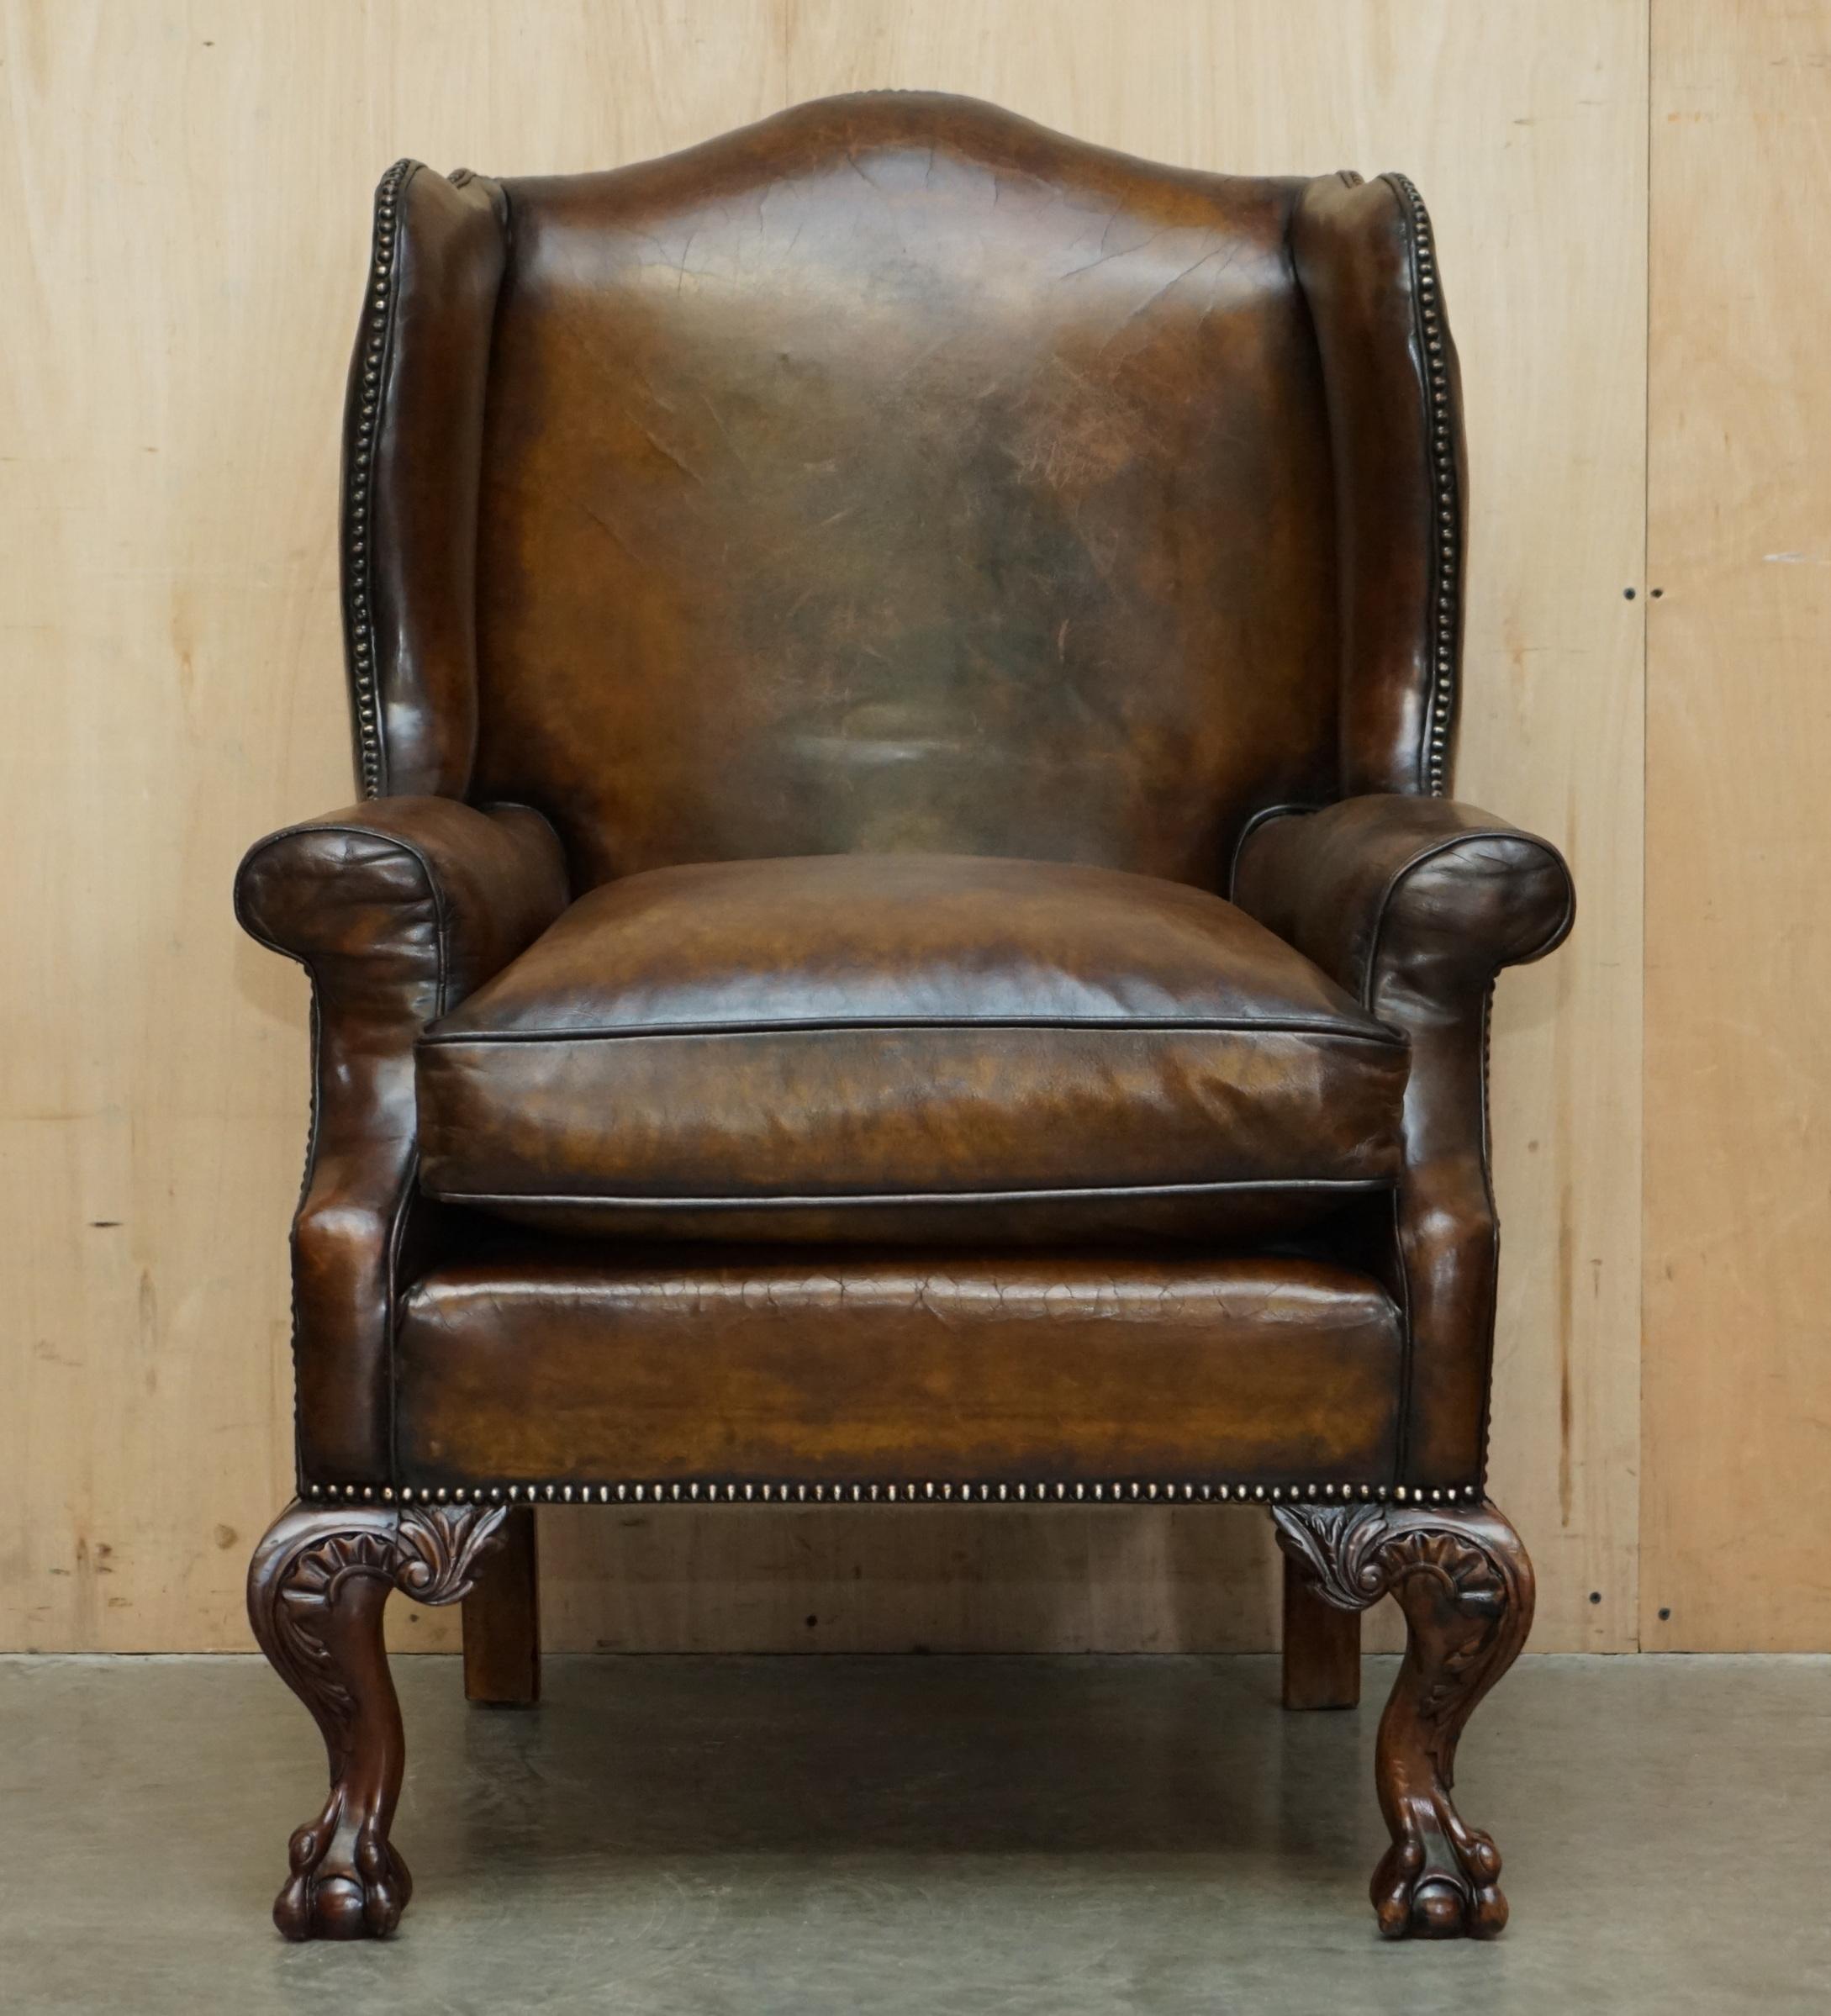 George II IMPORTANT RESTORED GEORGE II PERIOD CIRCA 1760 WiNGBACK BROWN LEATHER ARMCHAIR For Sale